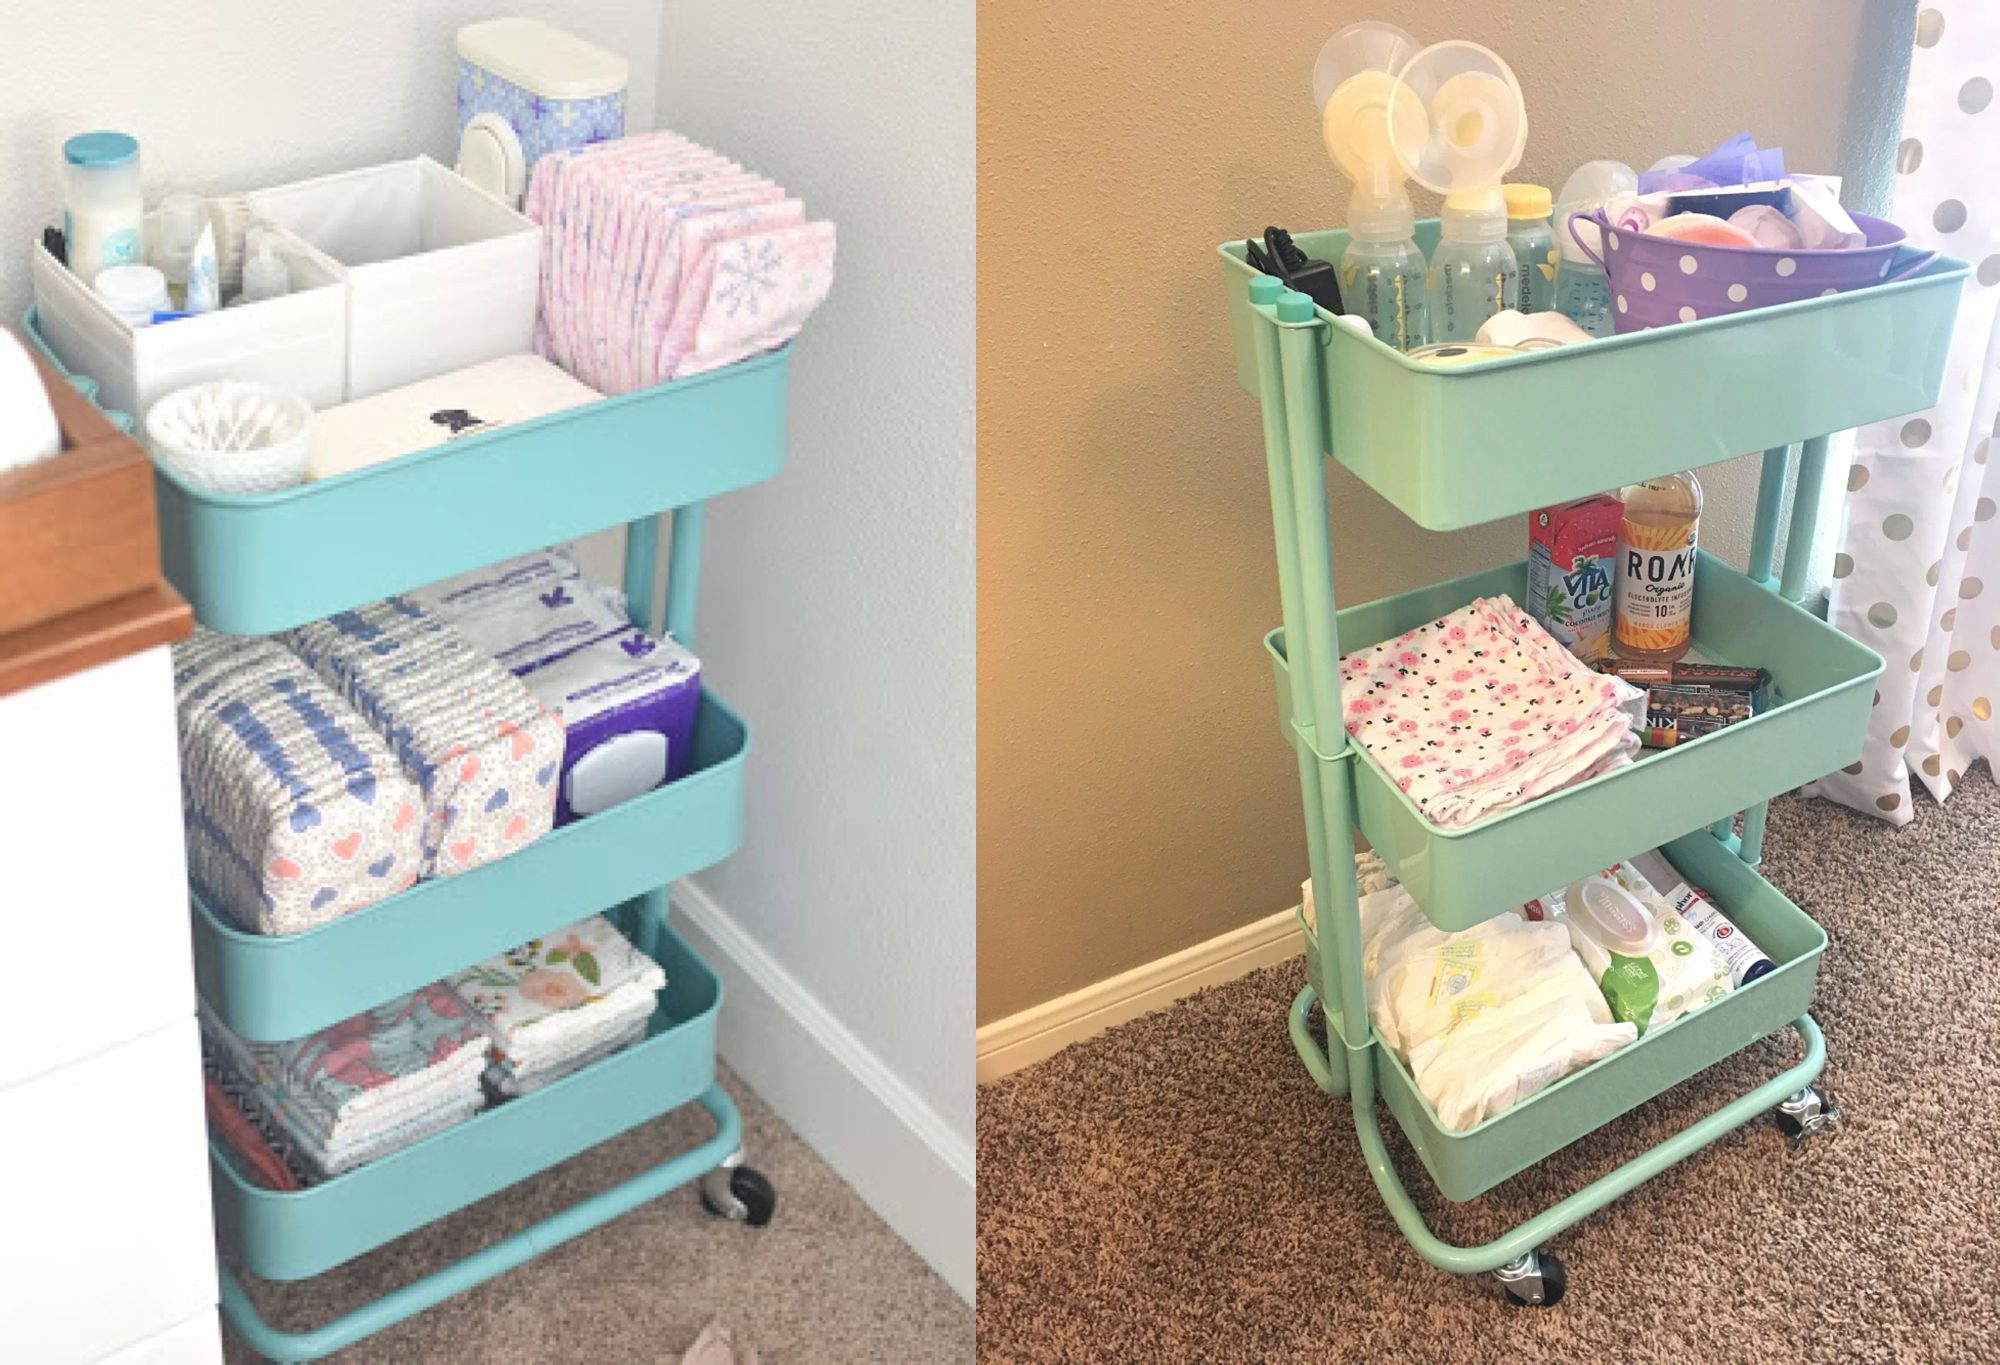 3 tier utility cart organization uses in baby's nursery | Reaj Roberts Photography